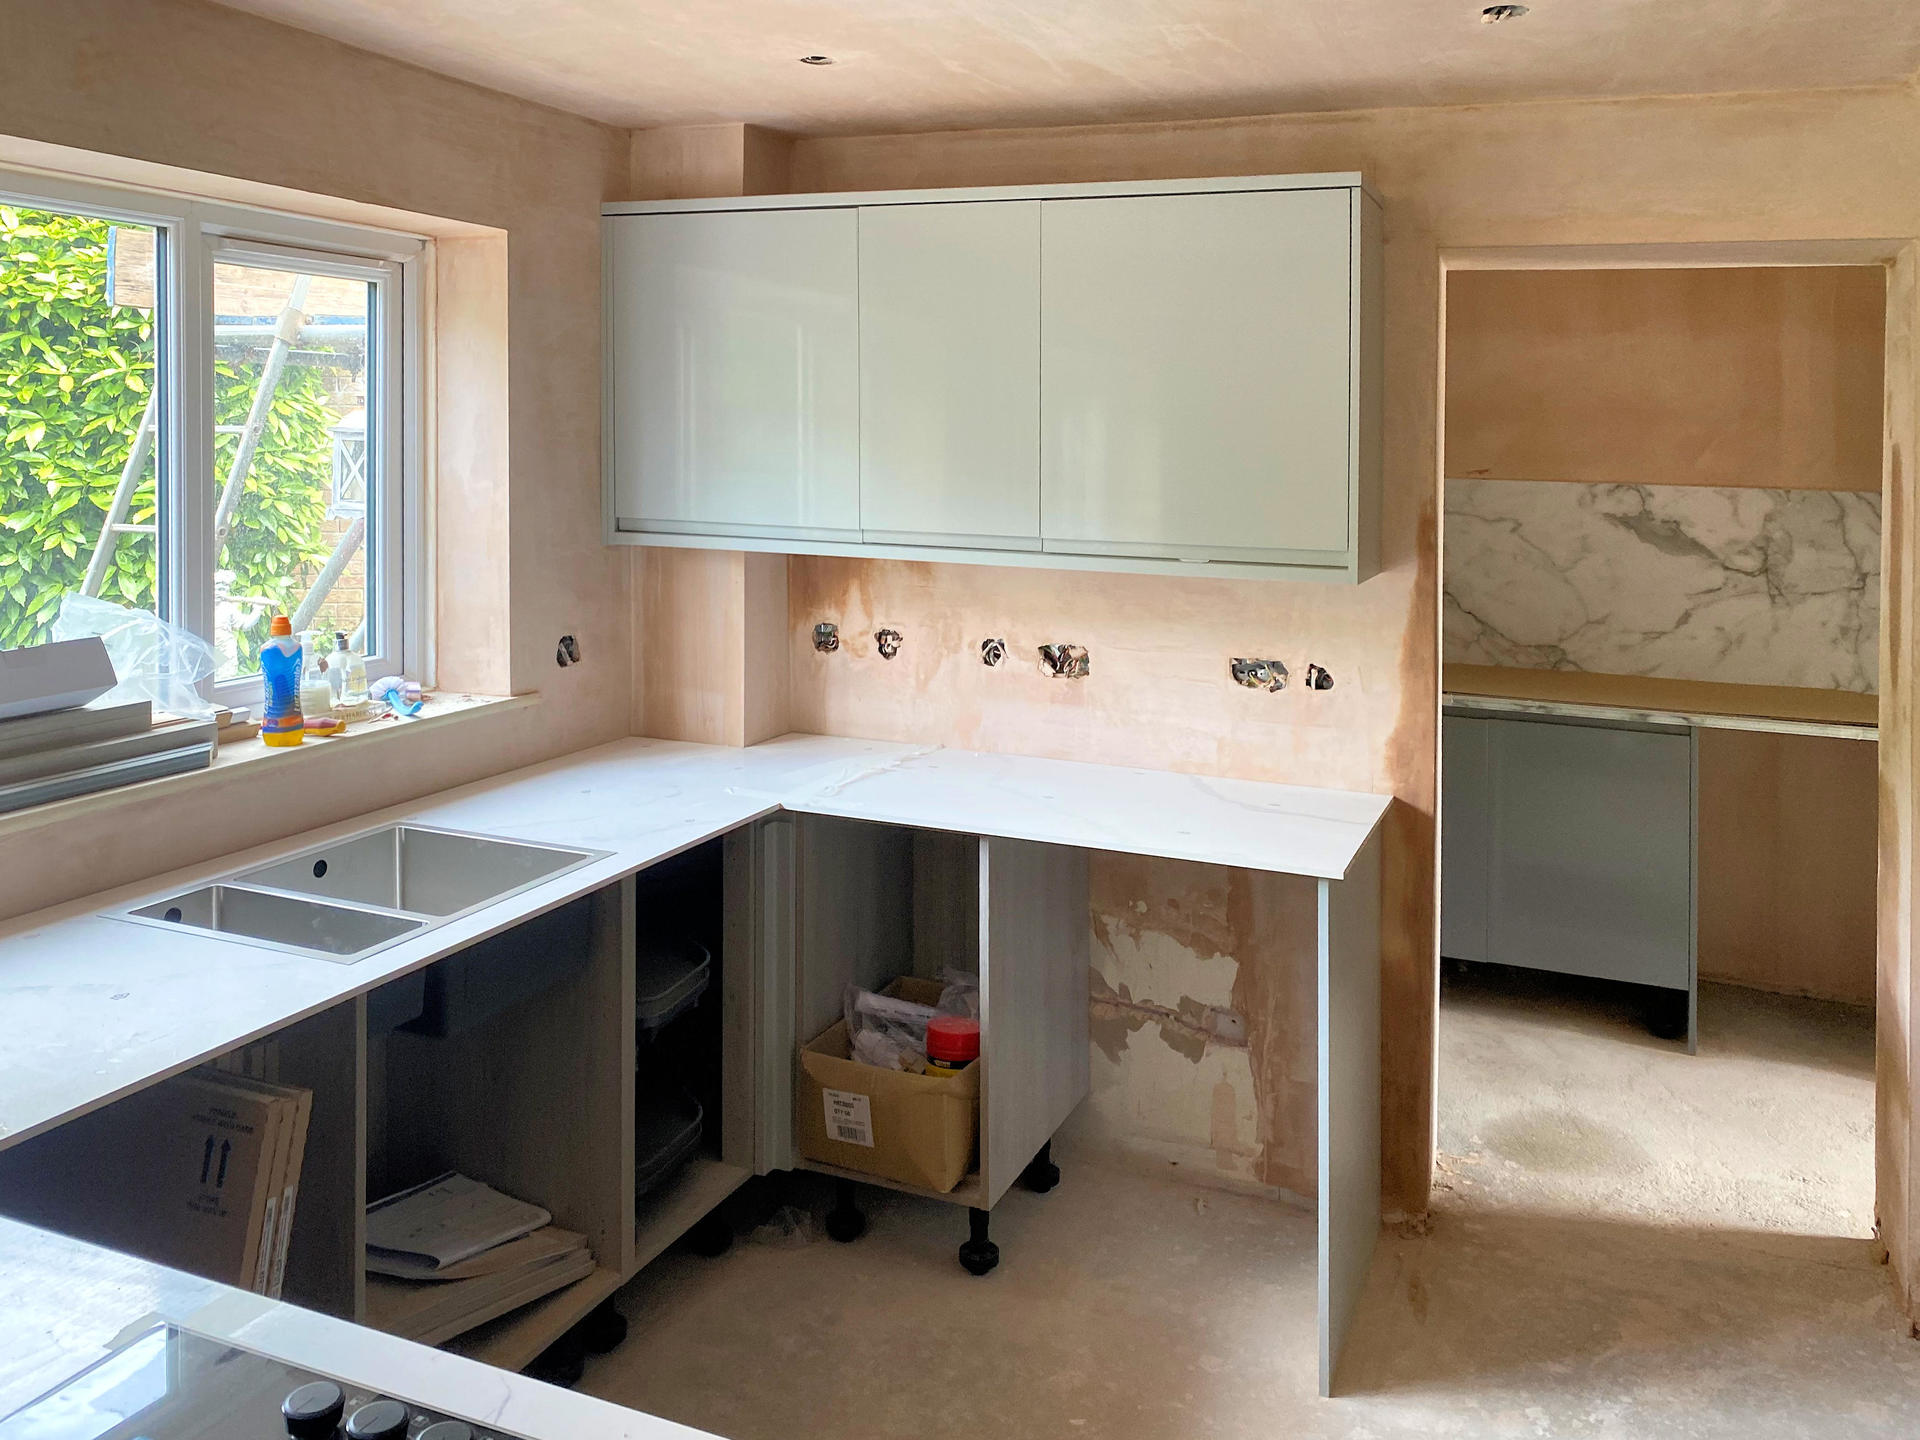 Kitchen & Extension Utility Room